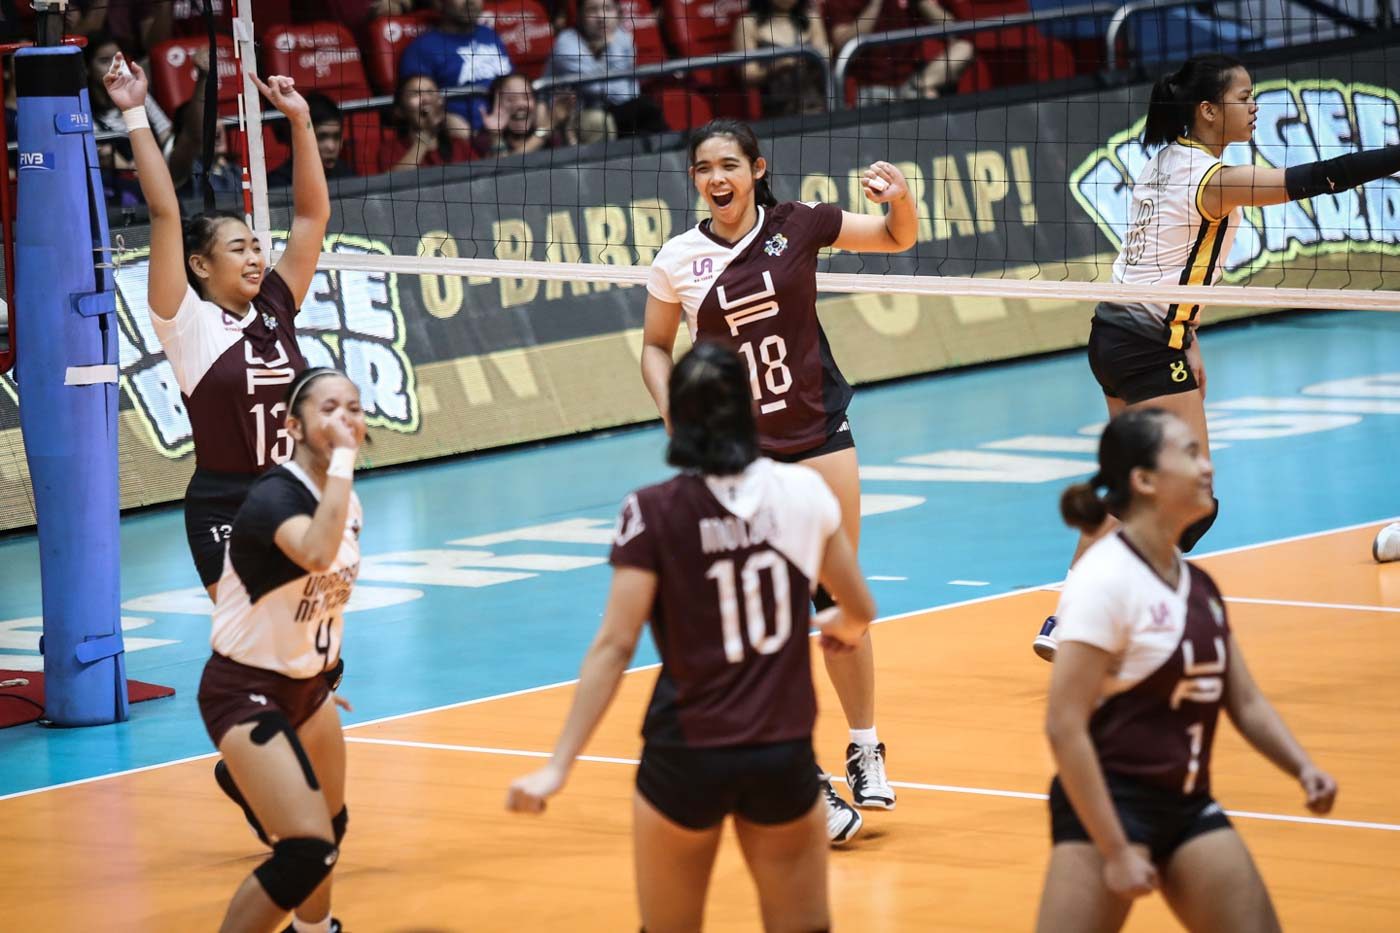 UP’s Tots Carlos shines as UAAP Player of the Week